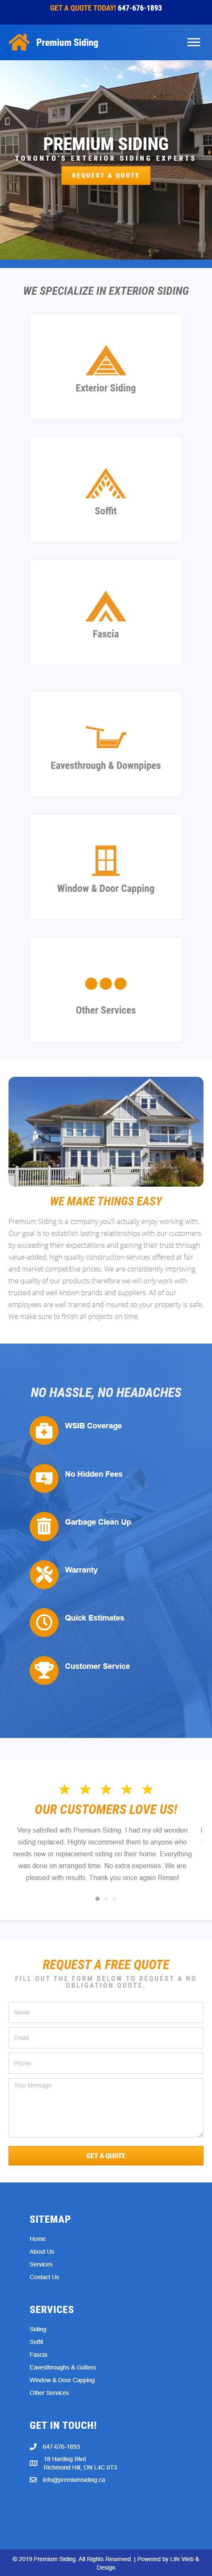 mobile version of web design project for siding company in Richmond Hill